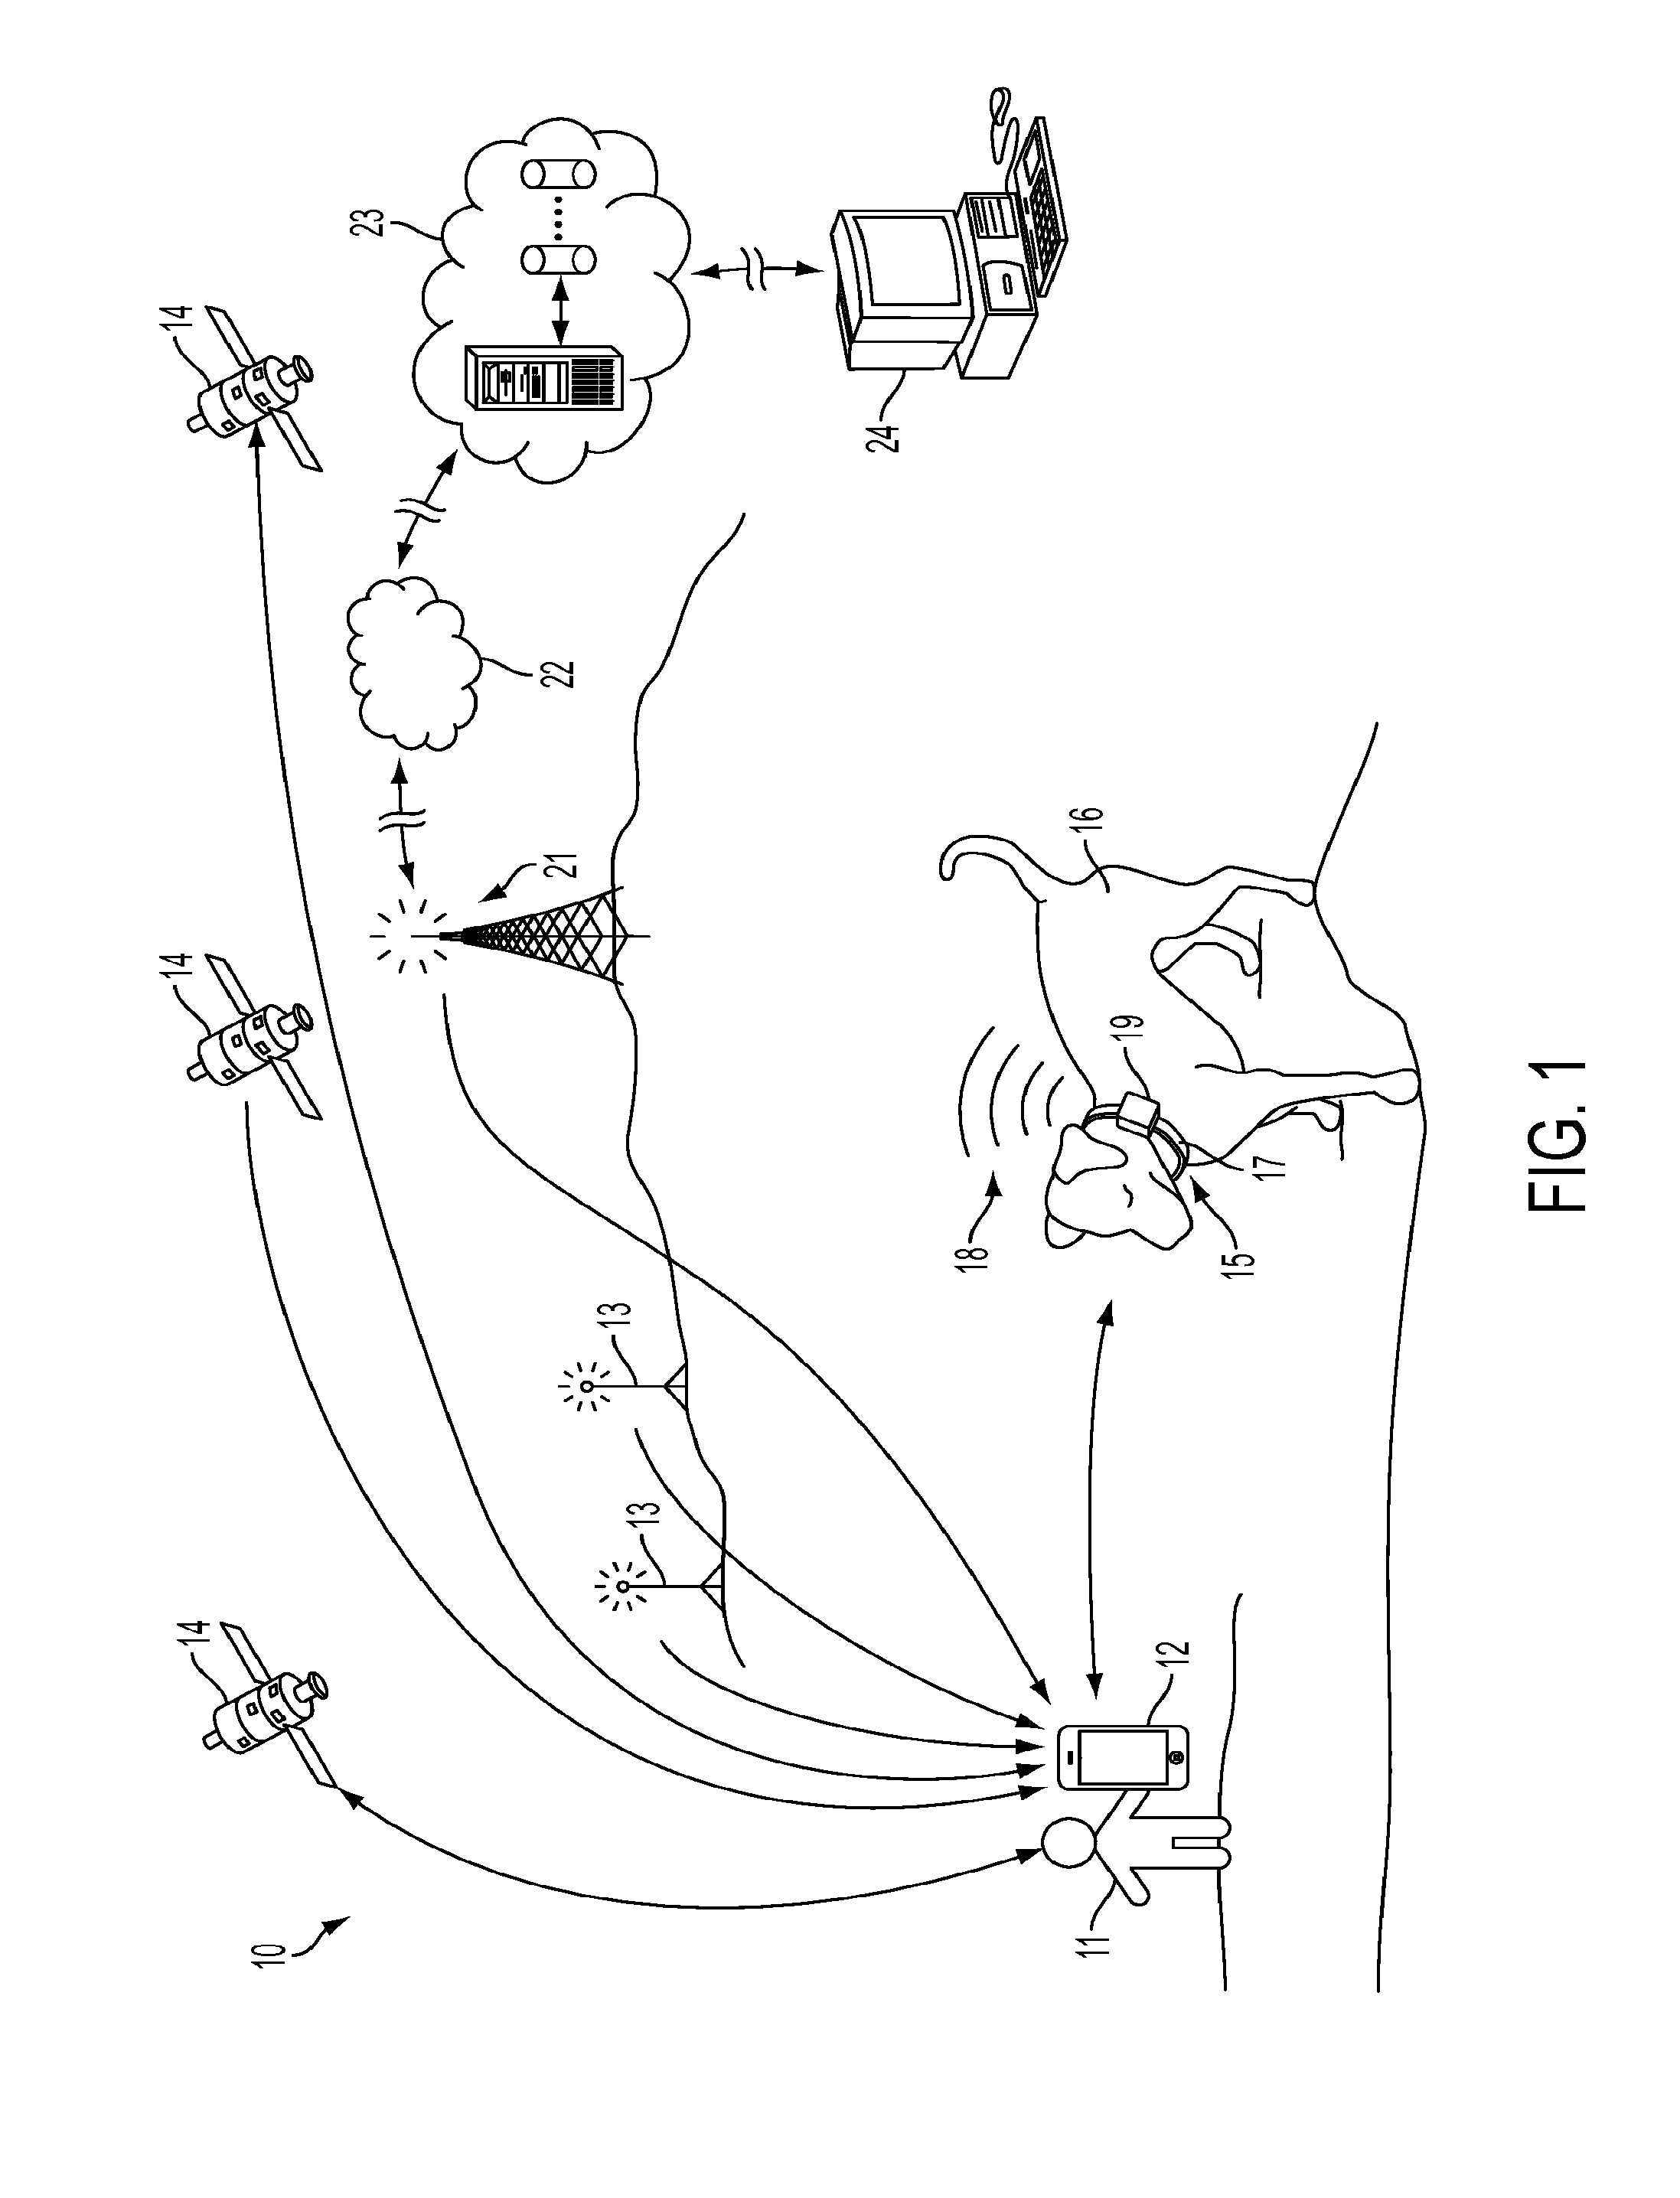 System and method for remote guidance of an animal to and from a target destination